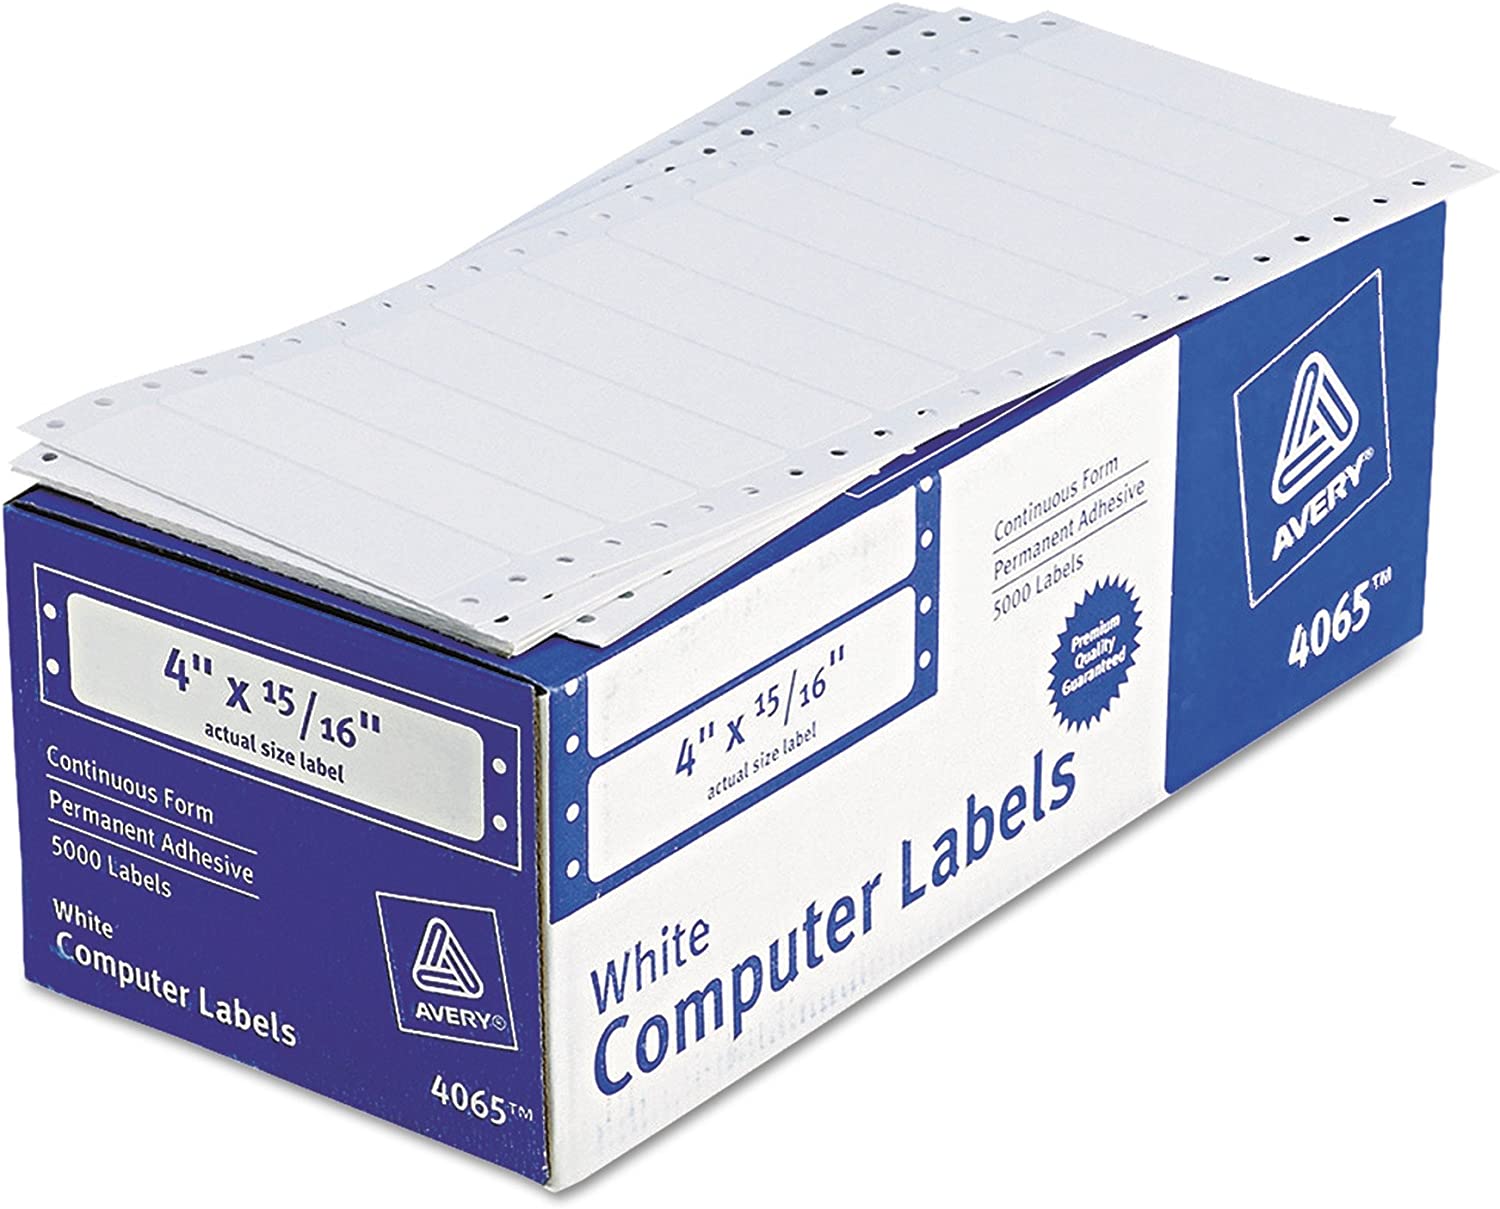 Avery 04065 White Continuous Form Hi- Speed (5000 4x15/16 Labels)